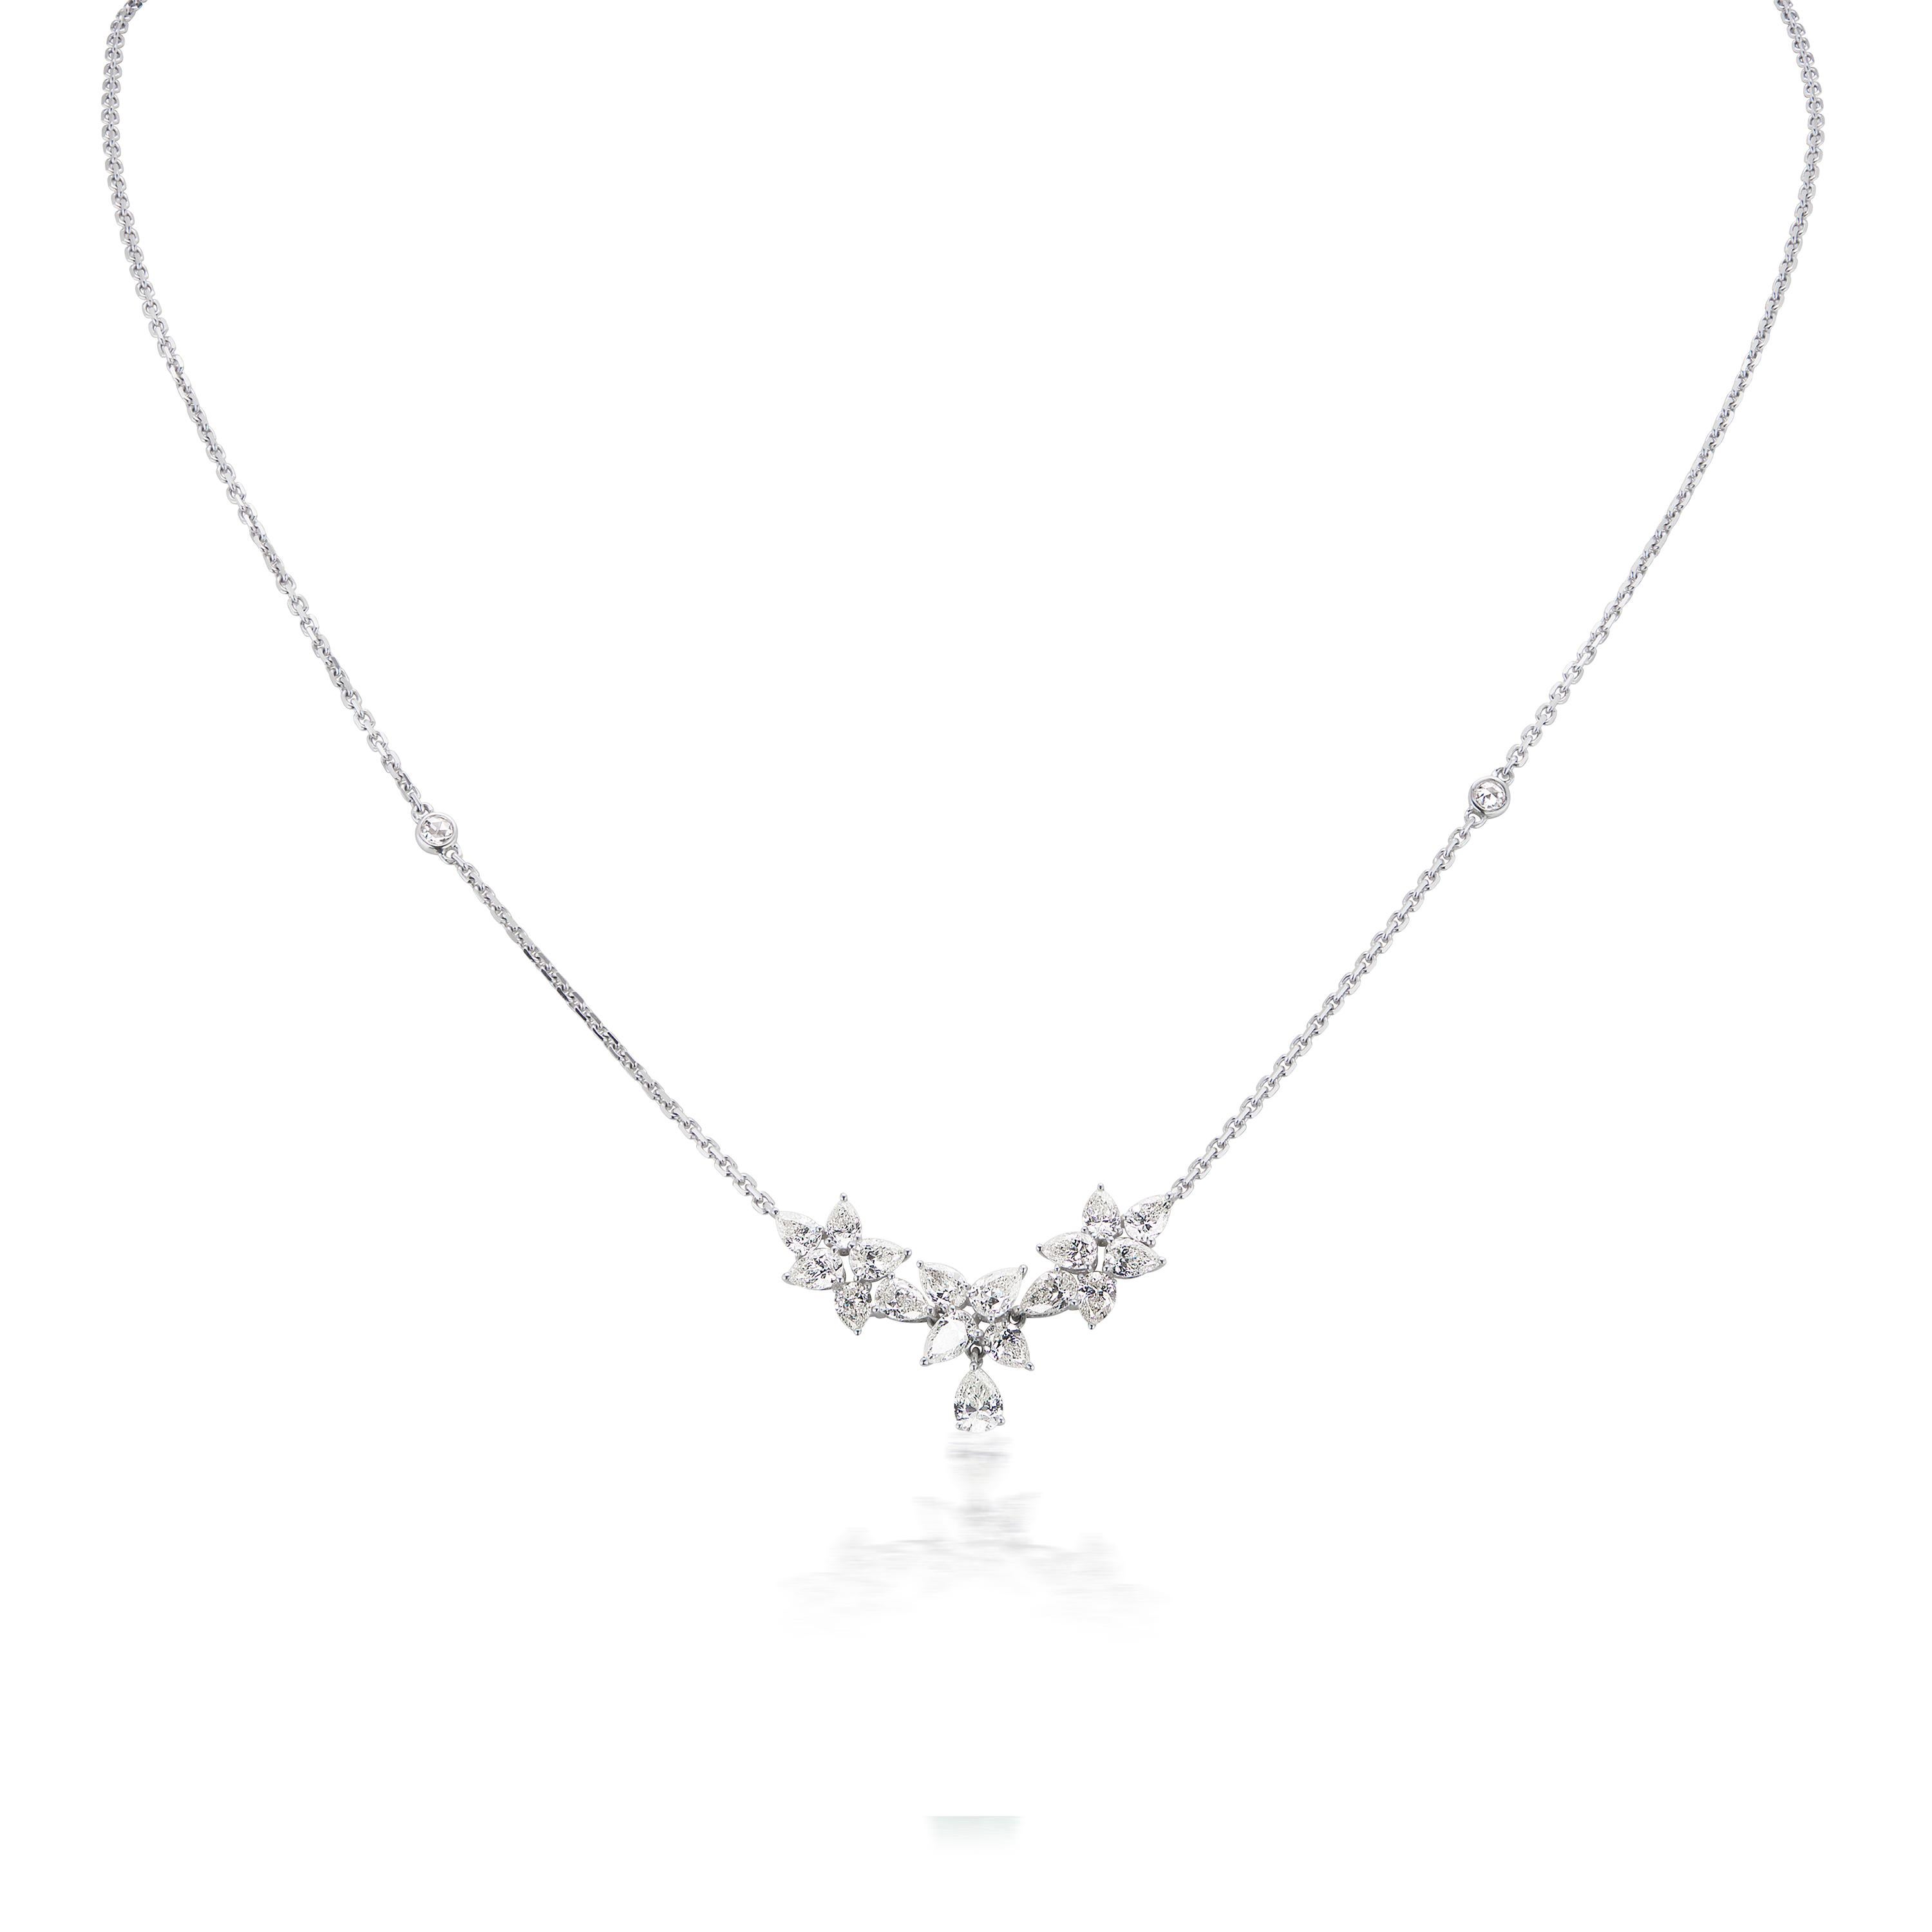 This wonderfully designed prong set jewelry is decorated with rose cut diamonds on its 18K white gold body. The sparkling rose cut diamonds are set in bezel on the 18k white gold necklace. Also, the cable chain necklace has marquise and pear